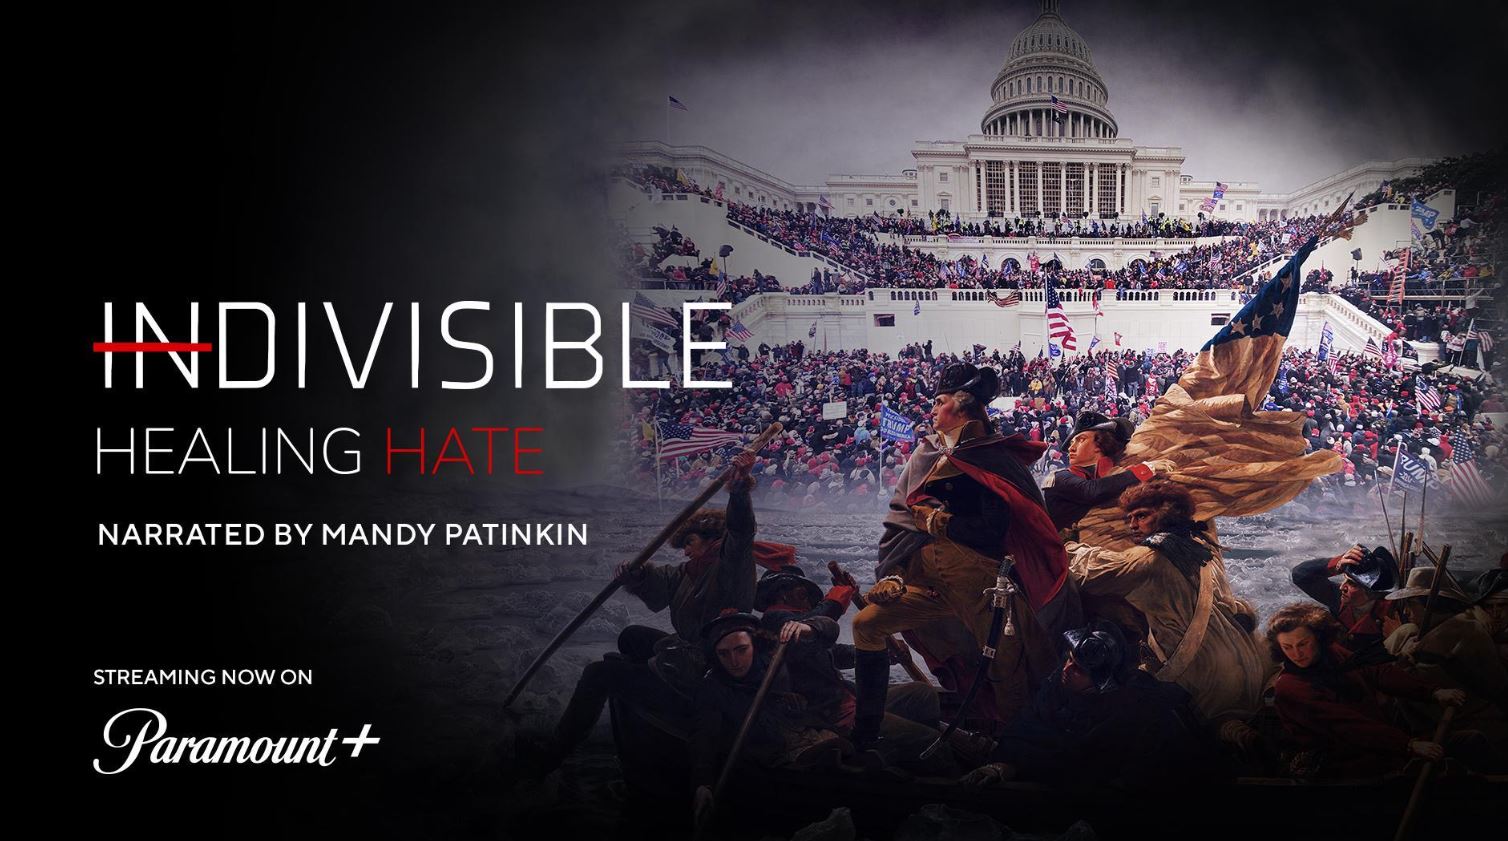 Indivisible: Healing Hate on Paramount+